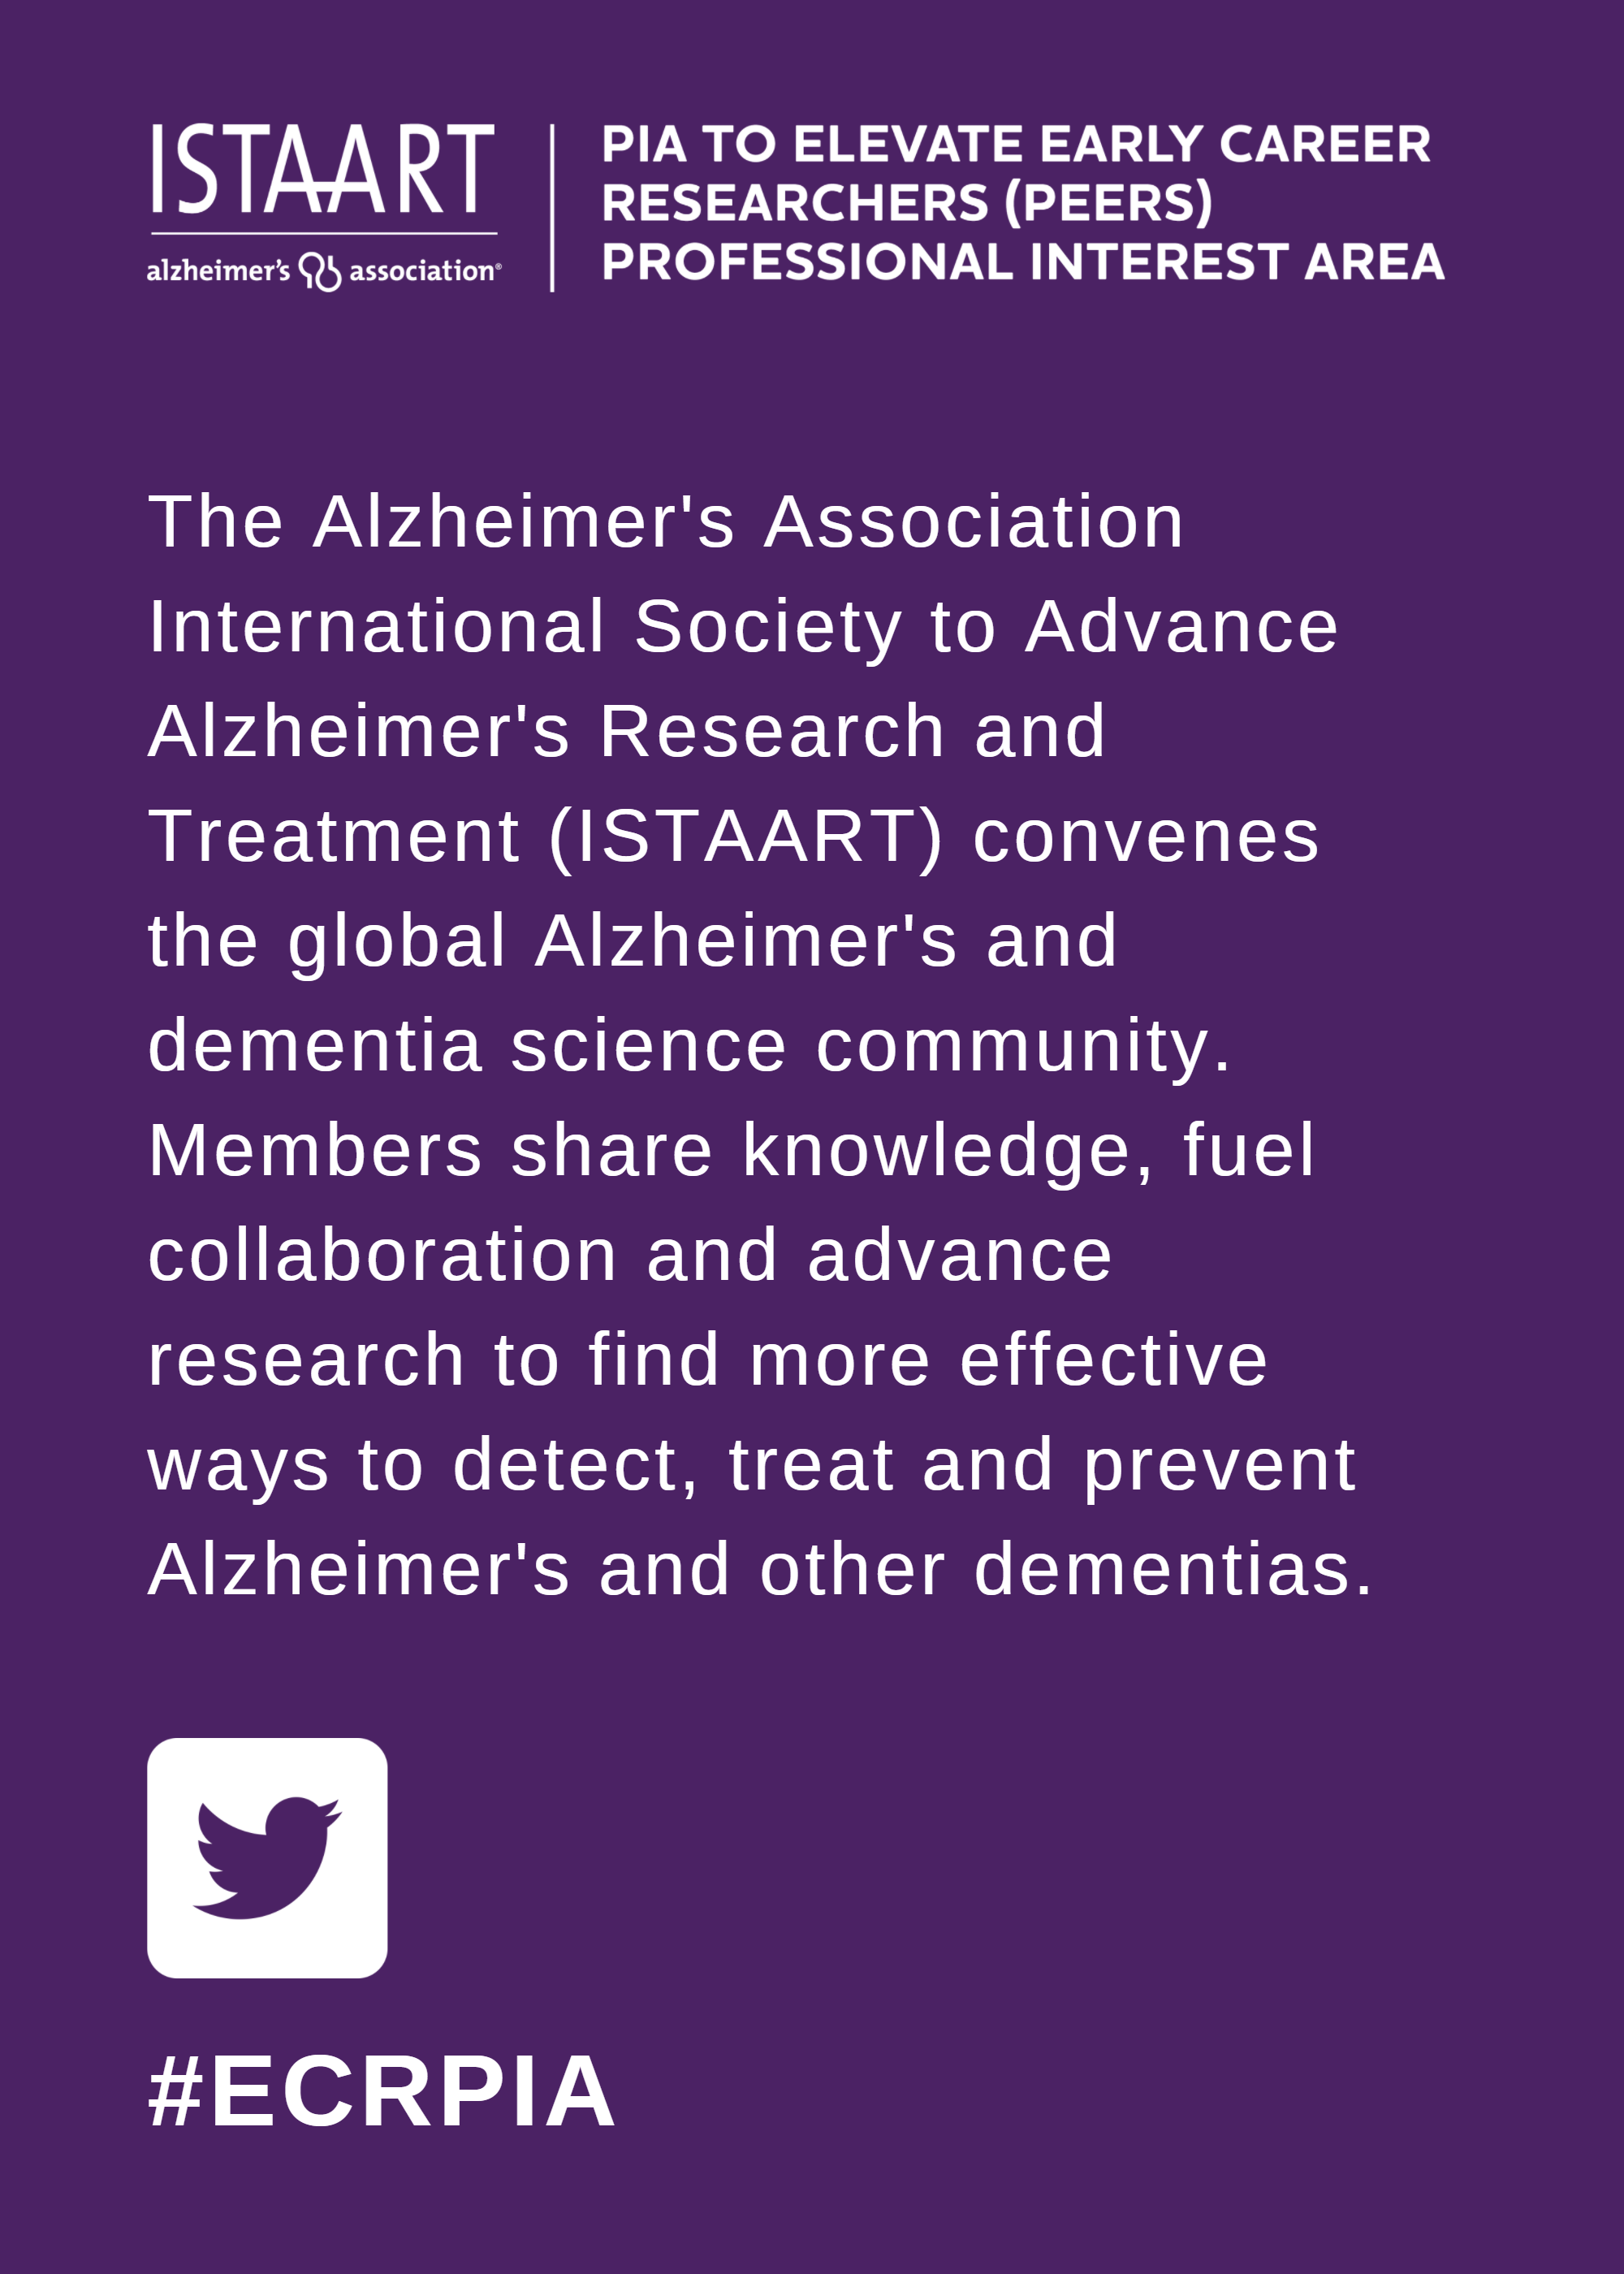 The Alzheimer's Association International Society to Advance Alzheimer's Research and Treatment (ISTAART) convenes the global Alzheimer's and dementia science community. Members share knowledge, fuel collaboration and advance research to find more effective ways to detect, treat and prevent Alzheimer's and other dementias.